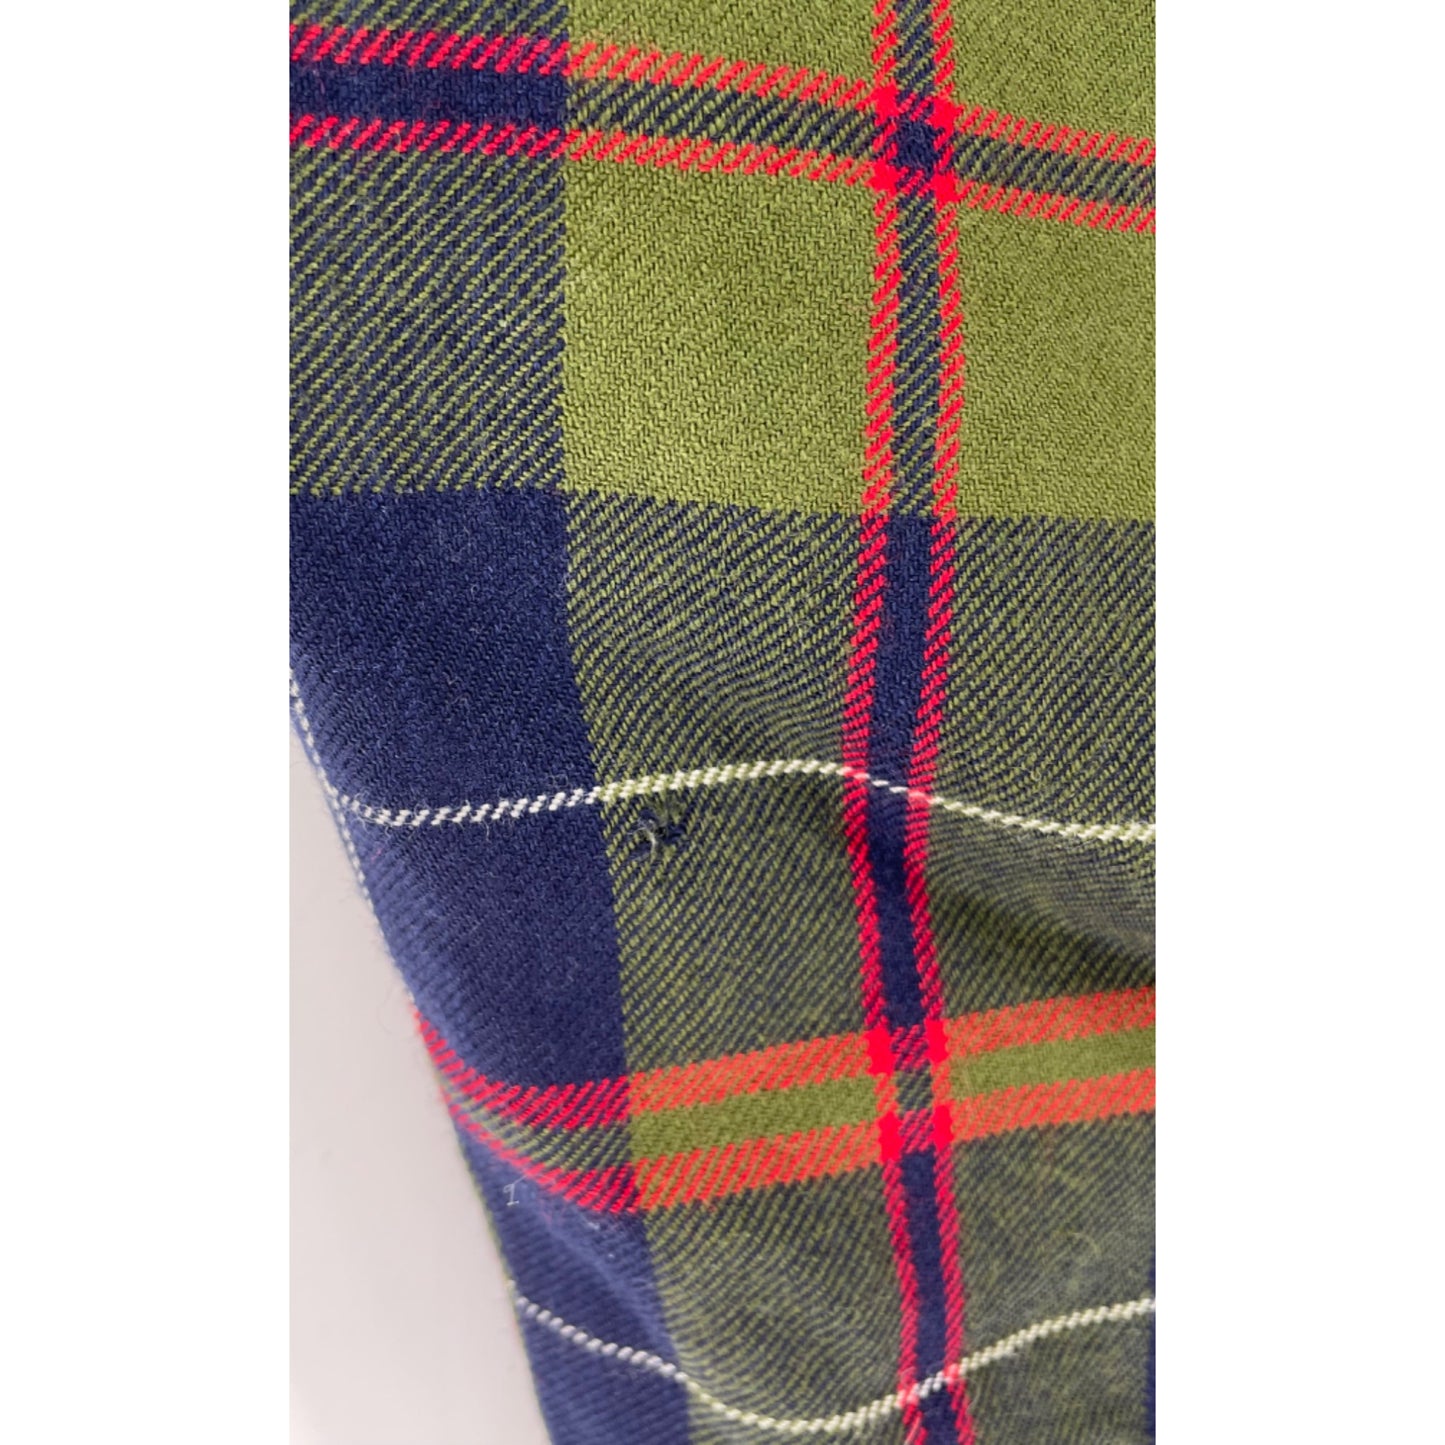 J. Crew Women's Size 6 Olive Green, Navy & Red Plaid Pants